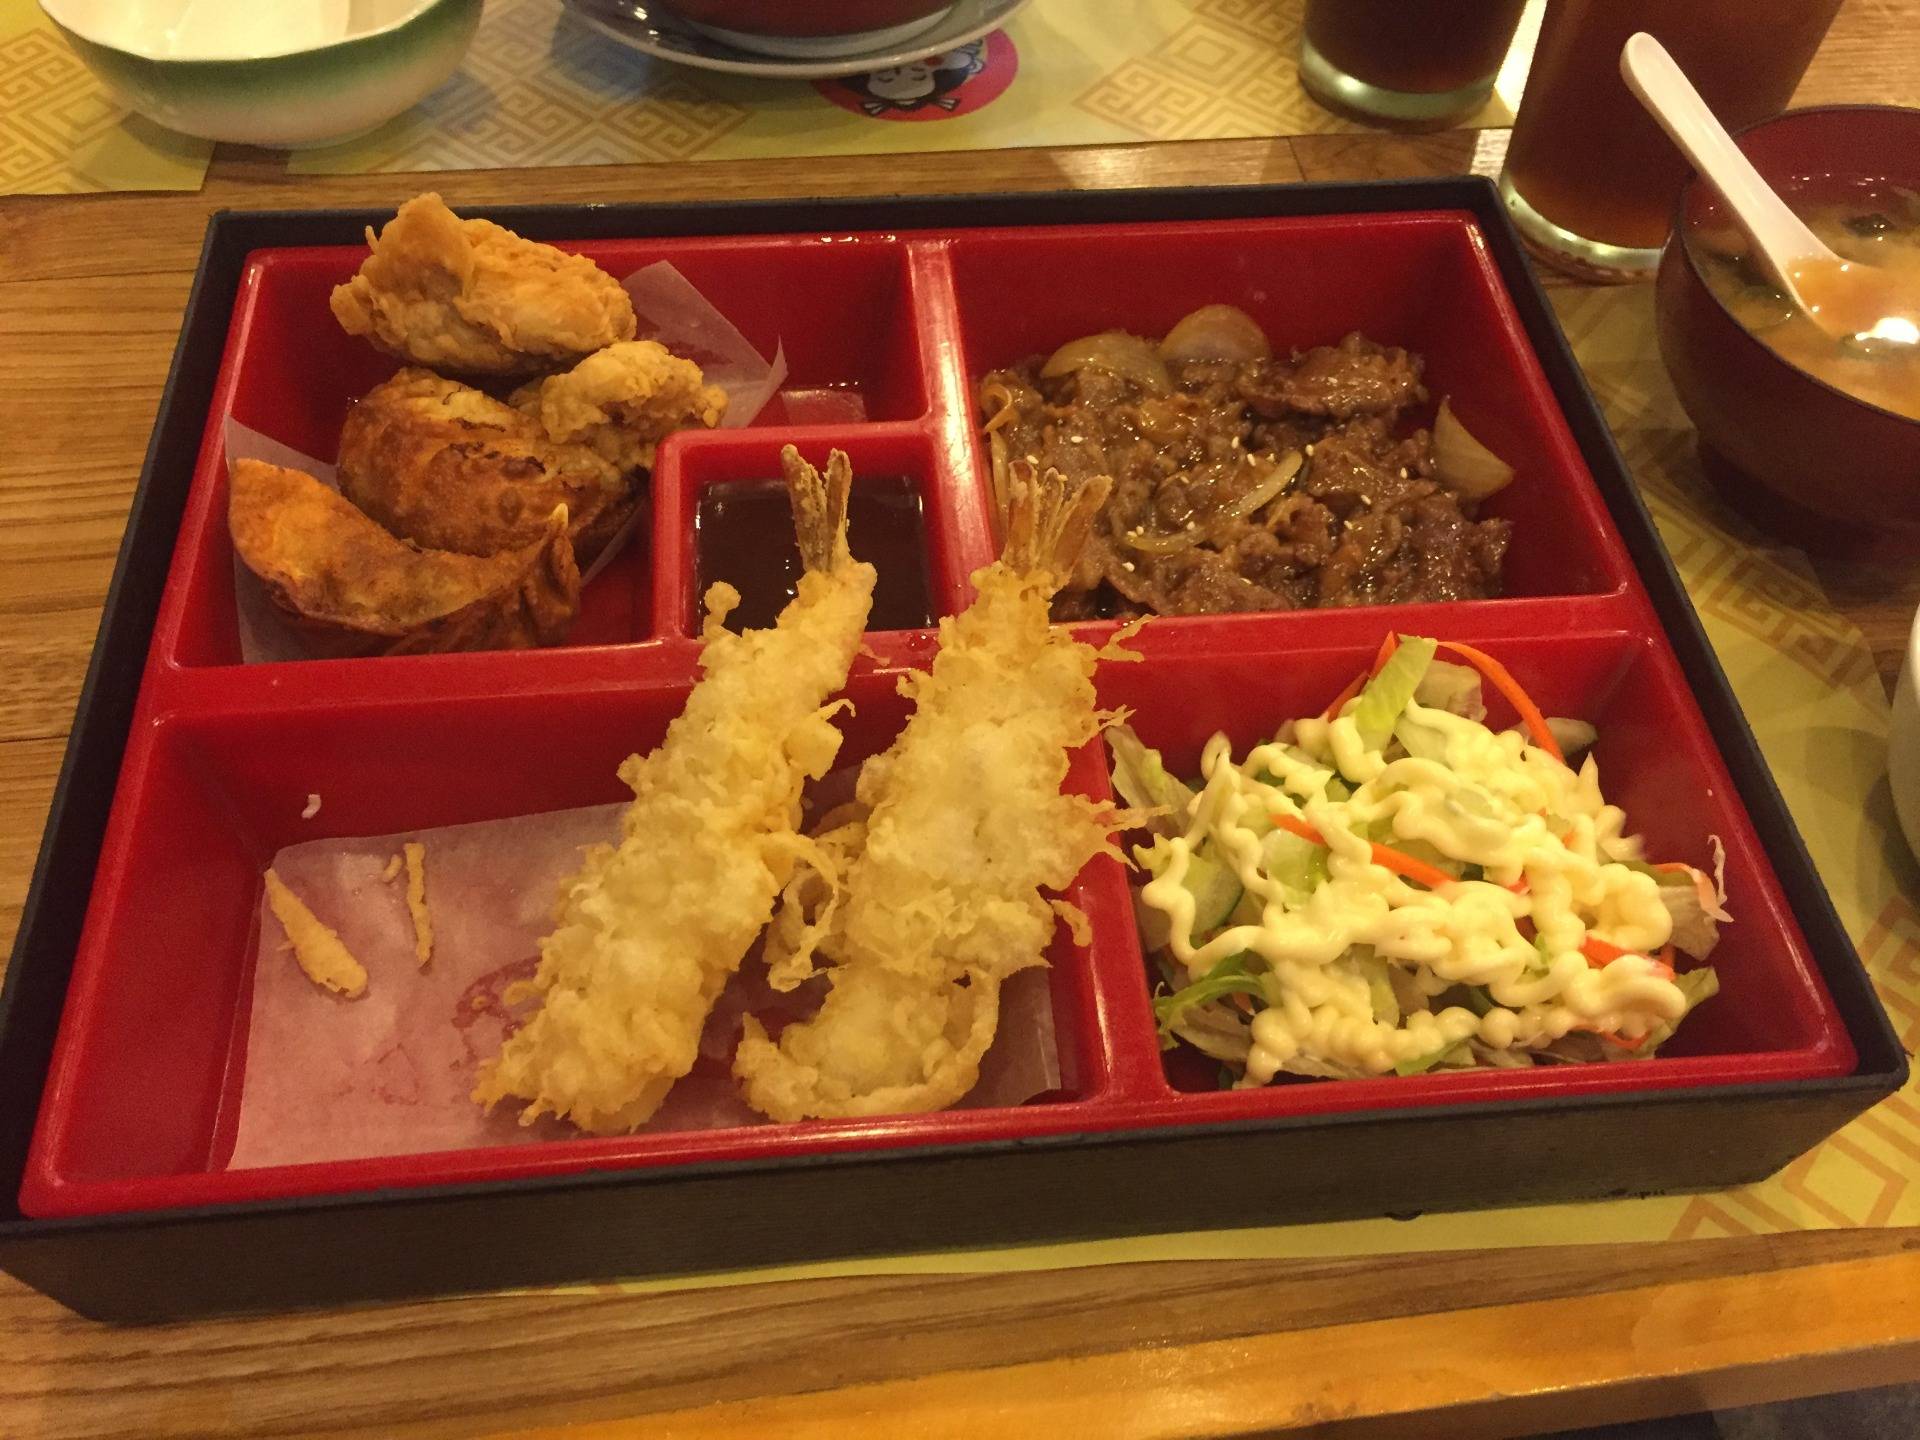 Bento box consisting of two shrimp tempuras, fried chickens, beef steak and mixed veggies with salad dressing.